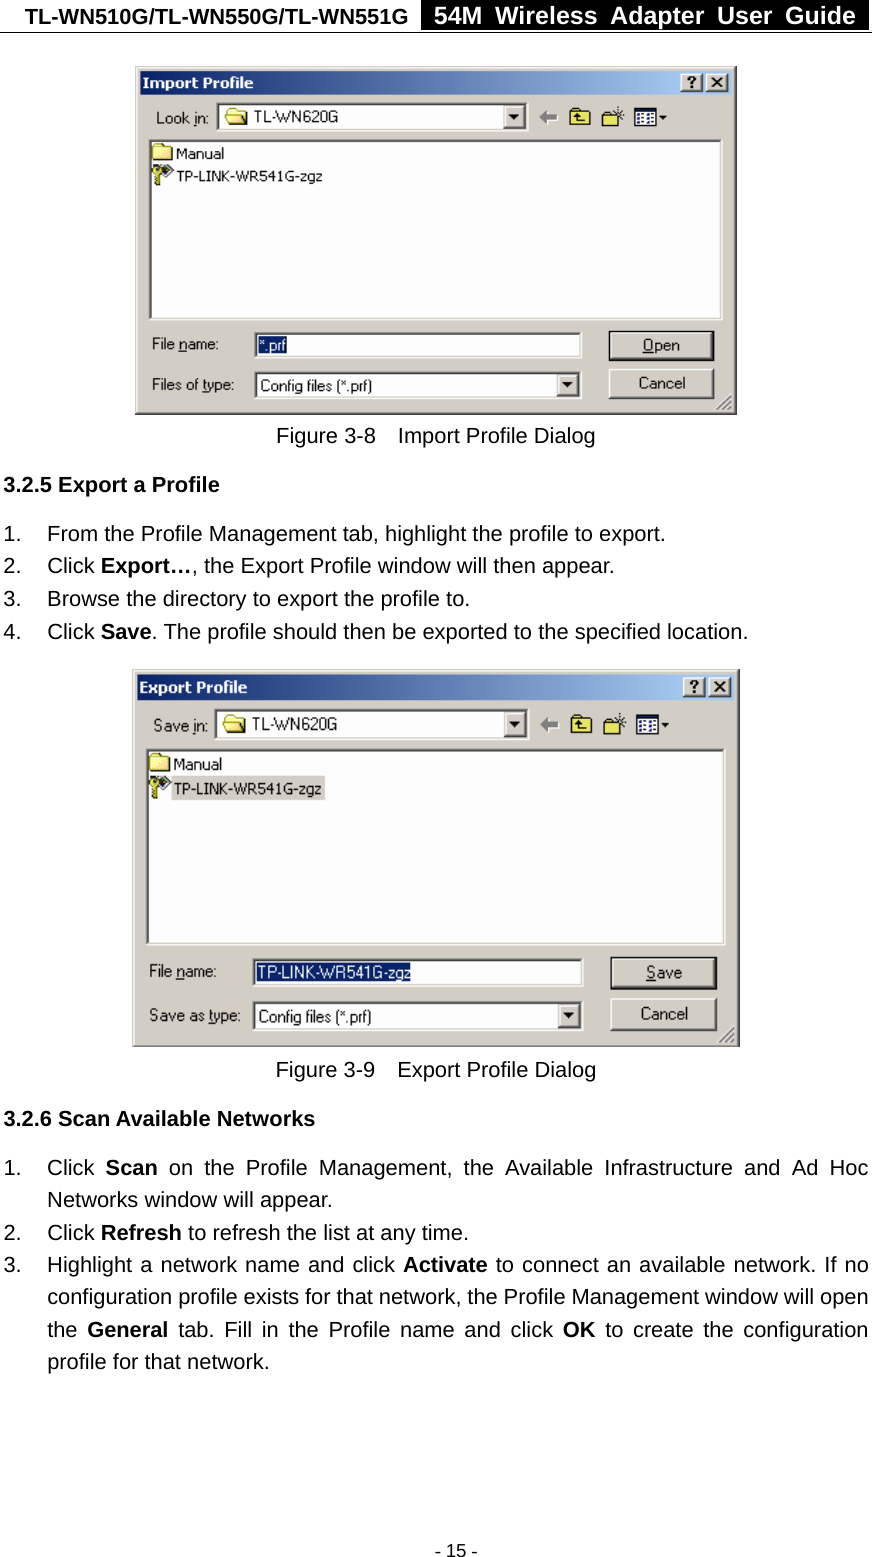 TL-WN510G/TL-WN550G/TL-WN551G  54M Wireless Adapter User Guide   Figure 3-8    Import Profile Dialog 3.2.5 Export a Profile 1.  From the Profile Management tab, highlight the profile to export. 2. Click Export…, the Export Profile window will then appear. 3.  Browse the directory to export the profile to. 4. Click Save. The profile should then be exported to the specified location.  Figure 3-9    Export Profile Dialog 3.2.6 Scan Available Networks 1. Click Scan on the Profile Management, the Available Infrastructure and Ad Hoc Networks window will appear. 2. Click Refresh to refresh the list at any time. 3.  Highlight a network name and click Activate to connect an available network. If no configuration profile exists for that network, the Profile Management window will open the  General tab. Fill in the Profile name and click OK to create the configuration profile for that network.  - 15 -